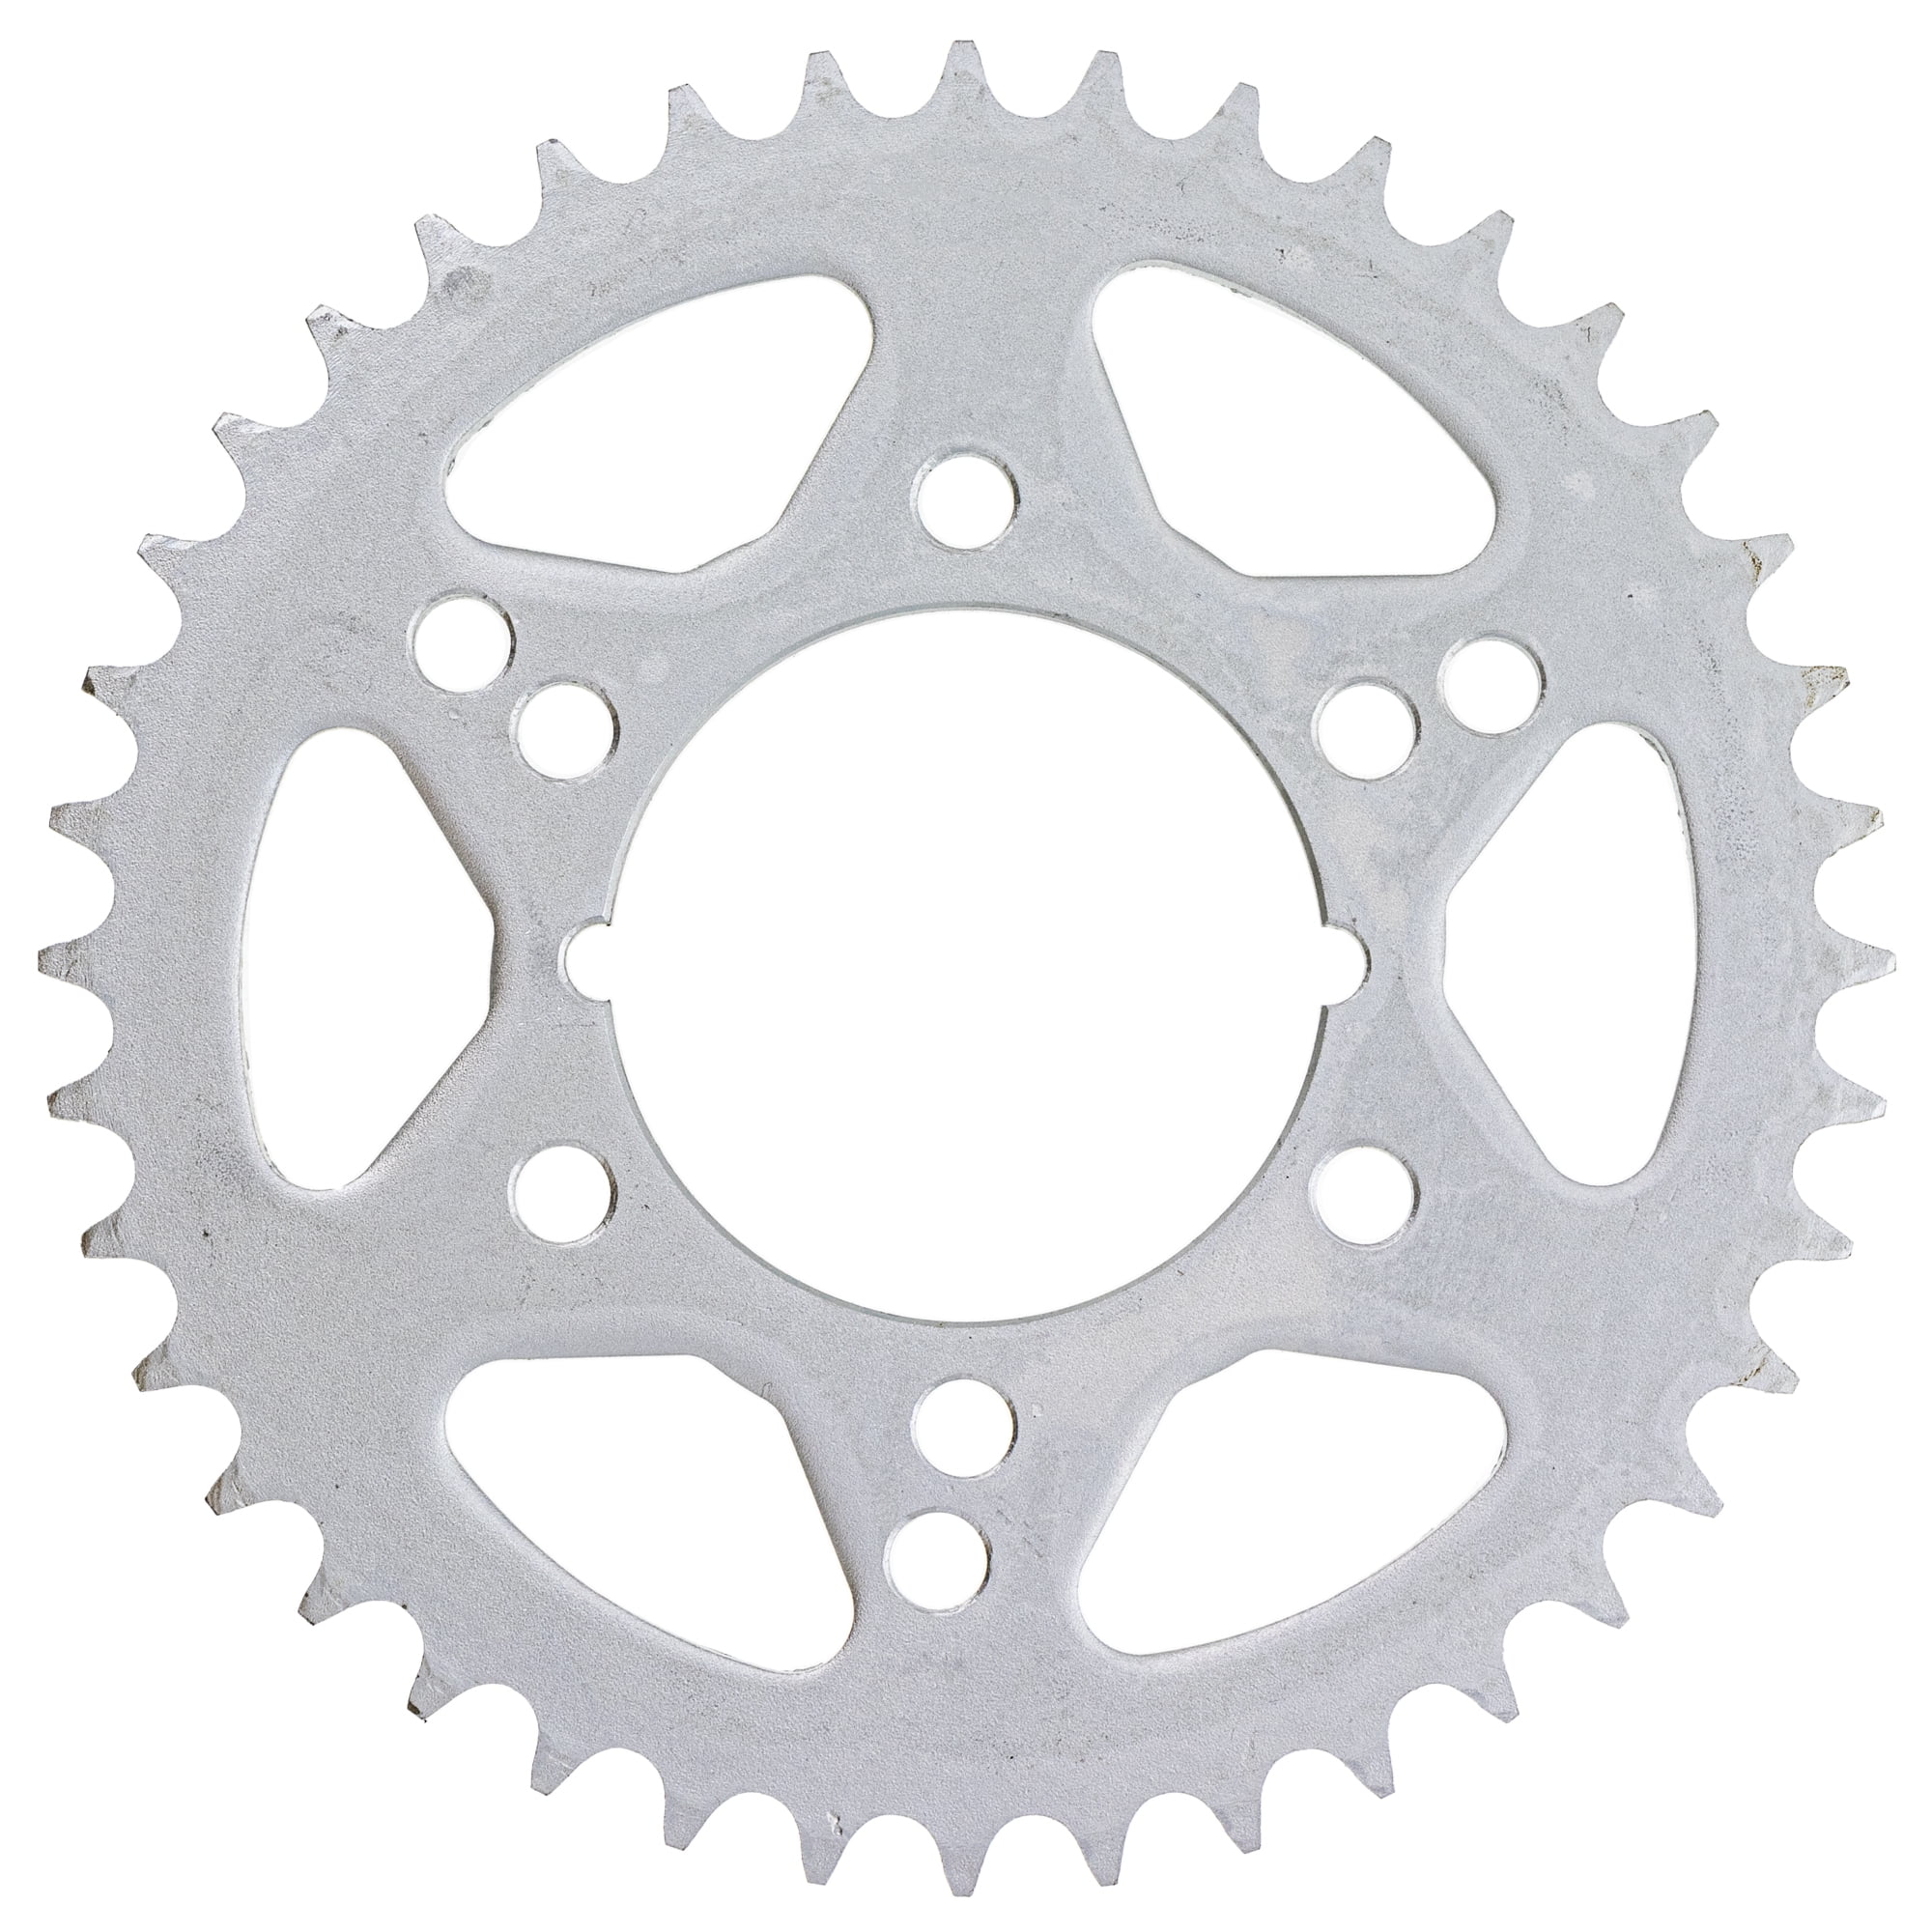 Primary Drive Front Sprocket 11 Tooth for Polaris Trail Boss 330 2003-2013 